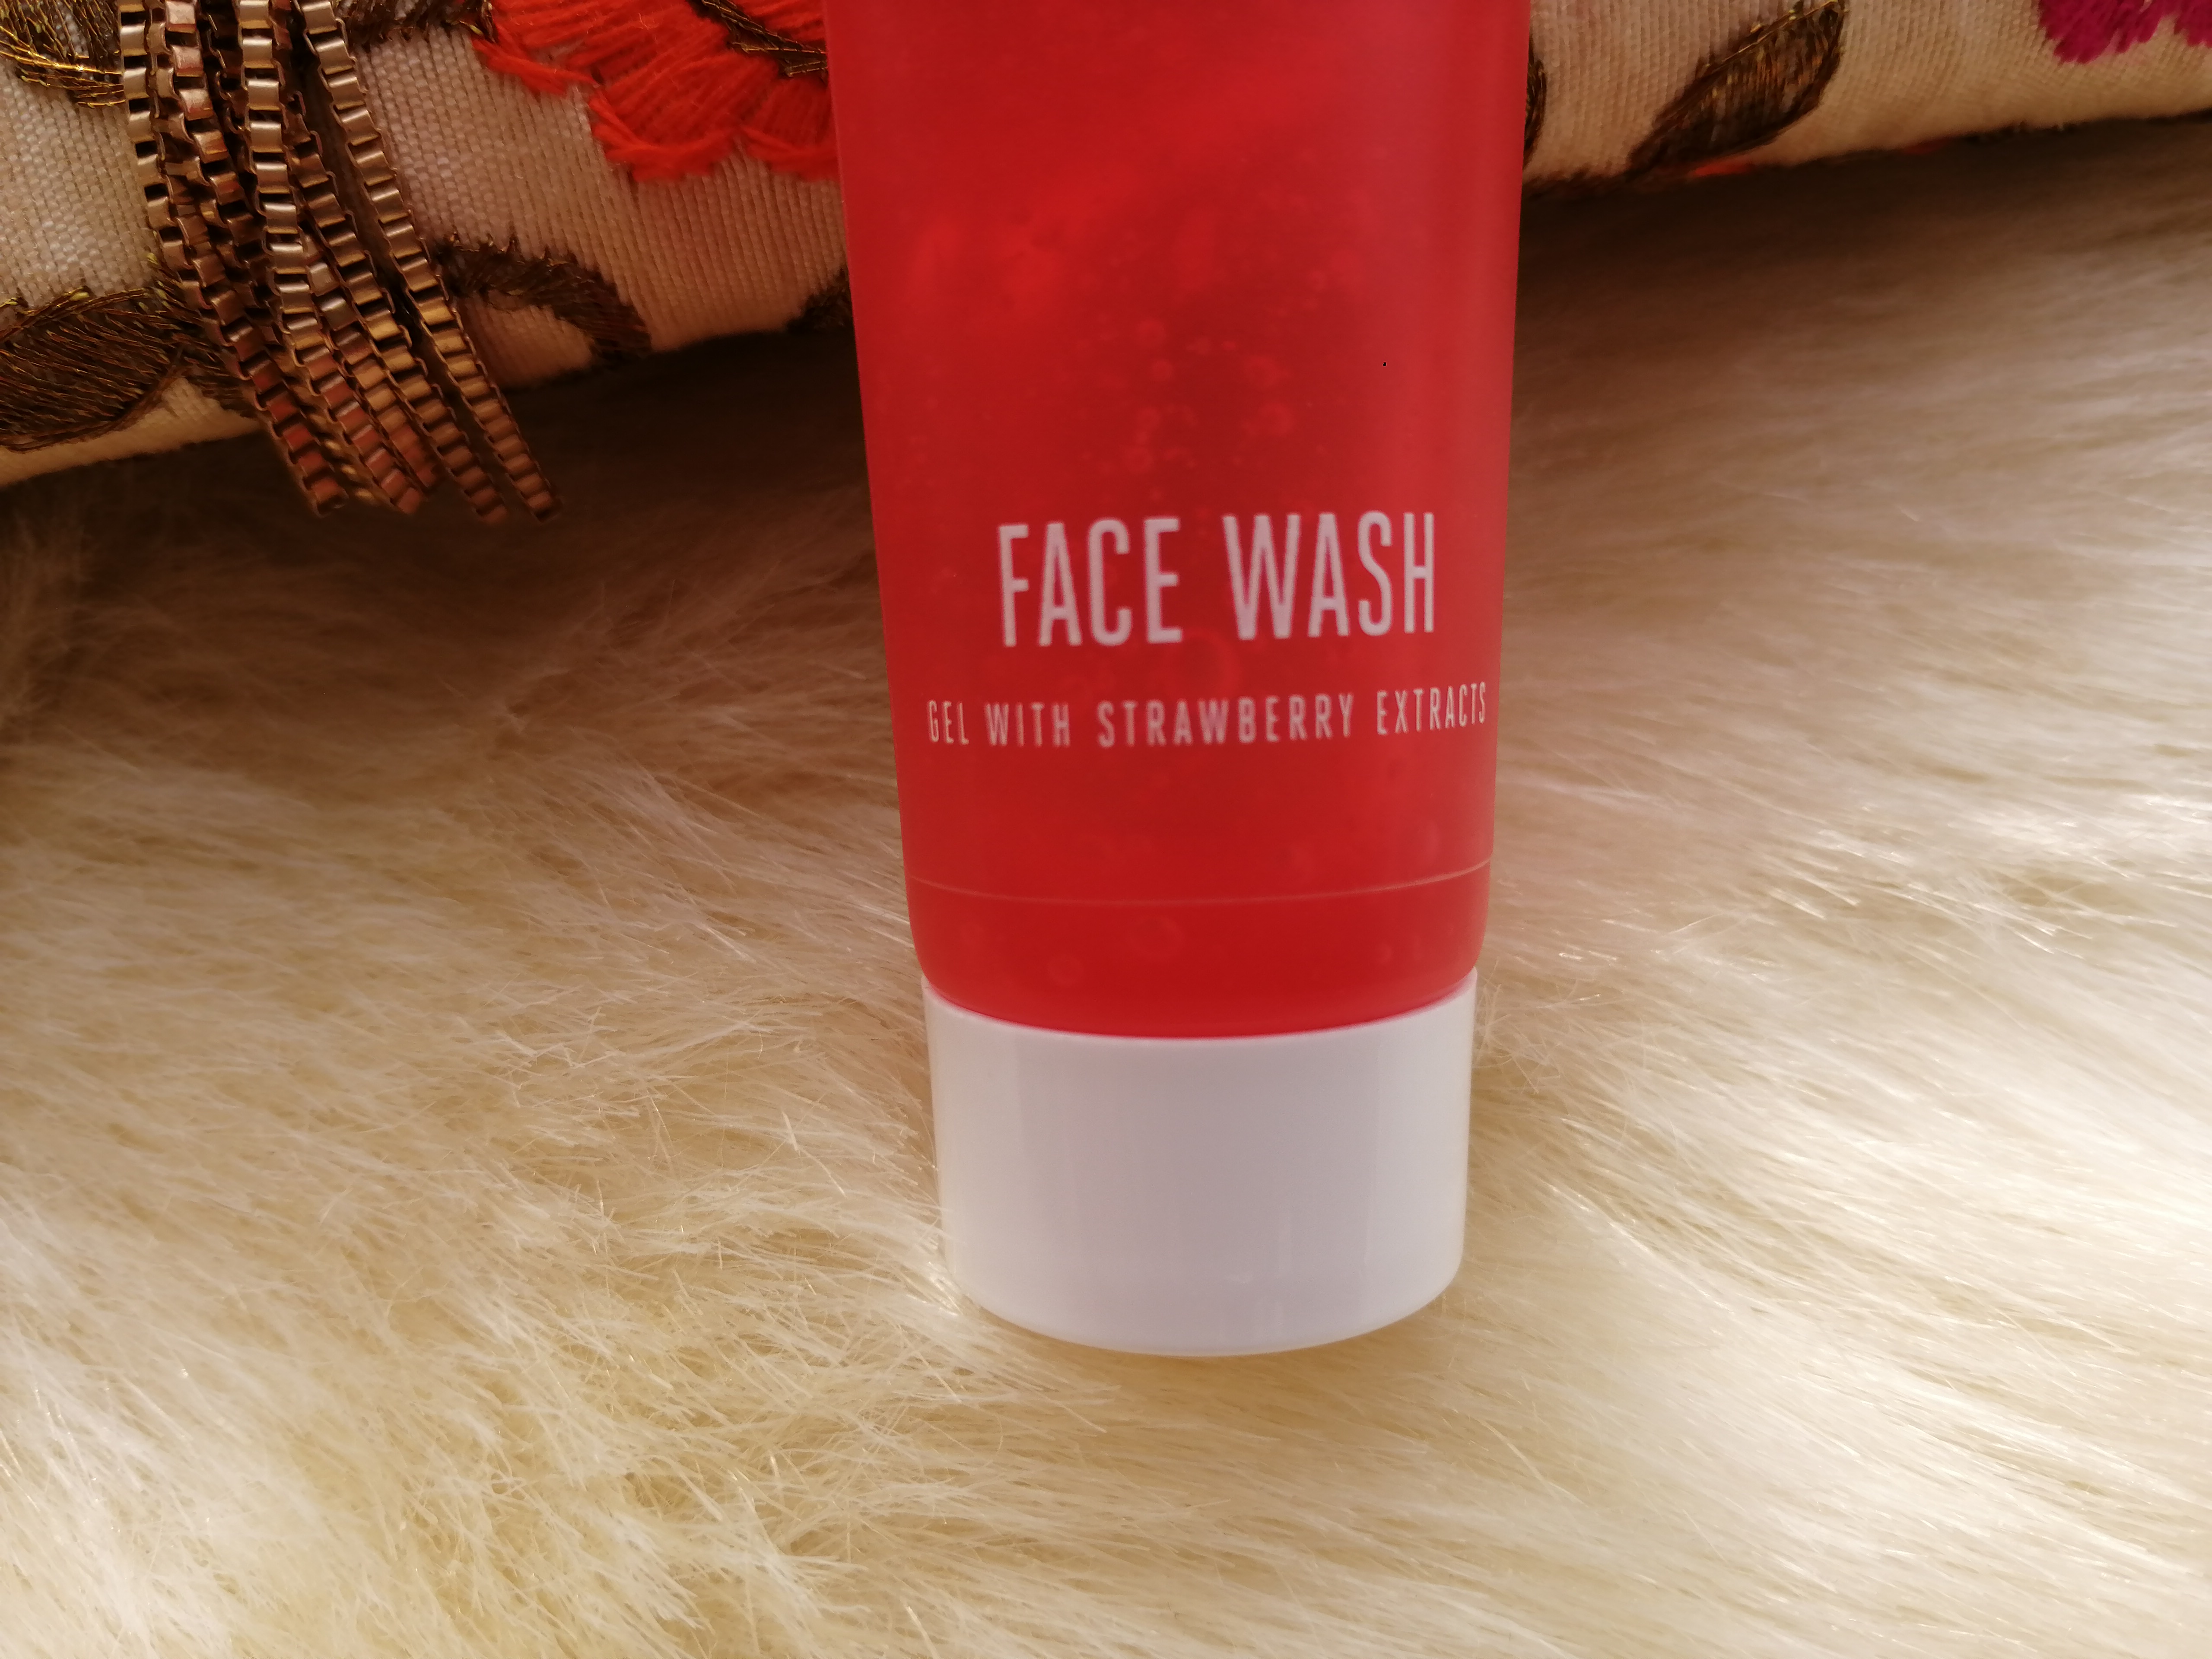 Lakme Blush & Glow Face Wash (Gel with Strawberry extracts)| Review